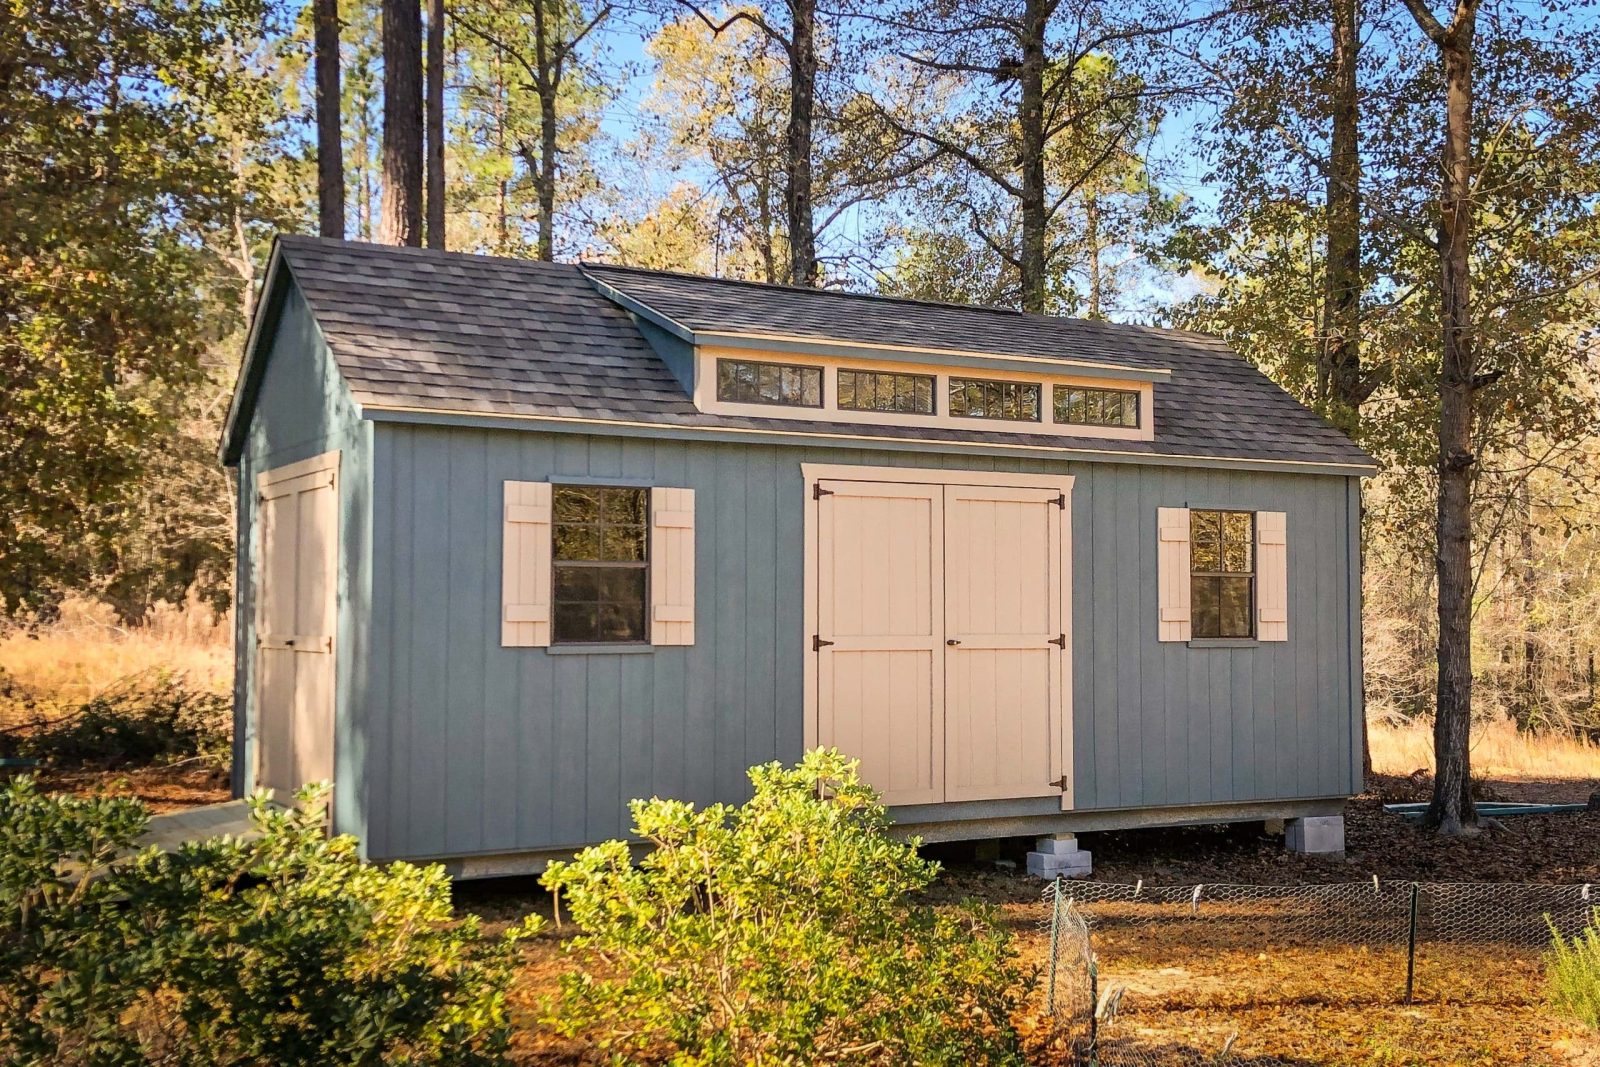 Storage Sheds in Swainsboro GA  Buy Directly from #1 Local Shed Builder